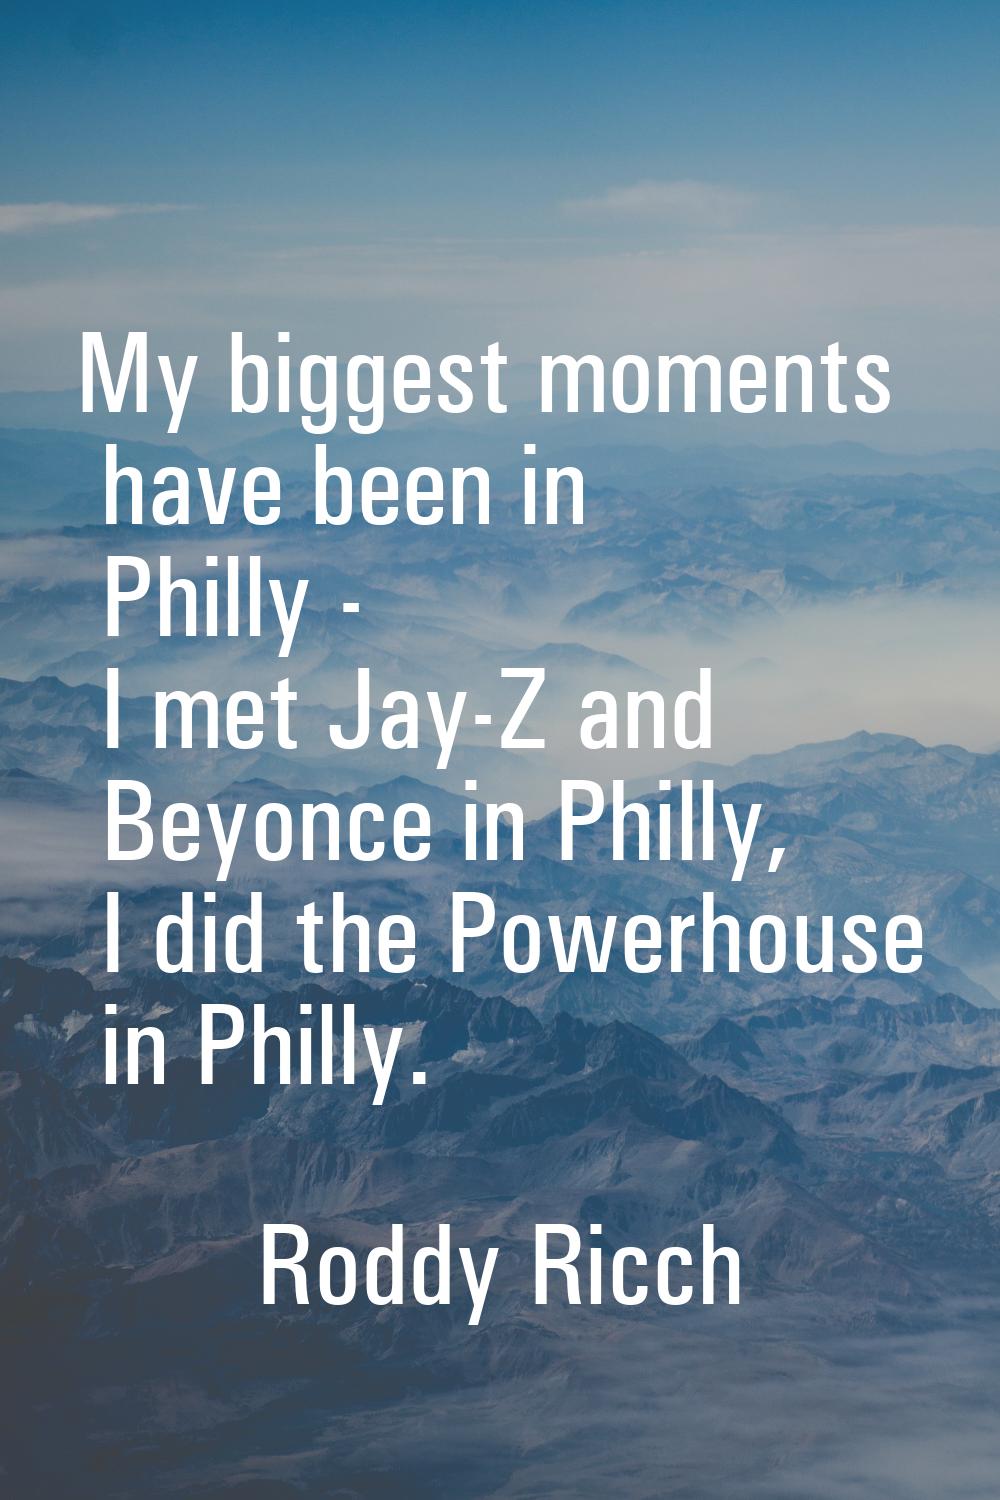 My biggest moments have been in Philly - I met Jay-Z and Beyonce in Philly, I did the Powerhouse in